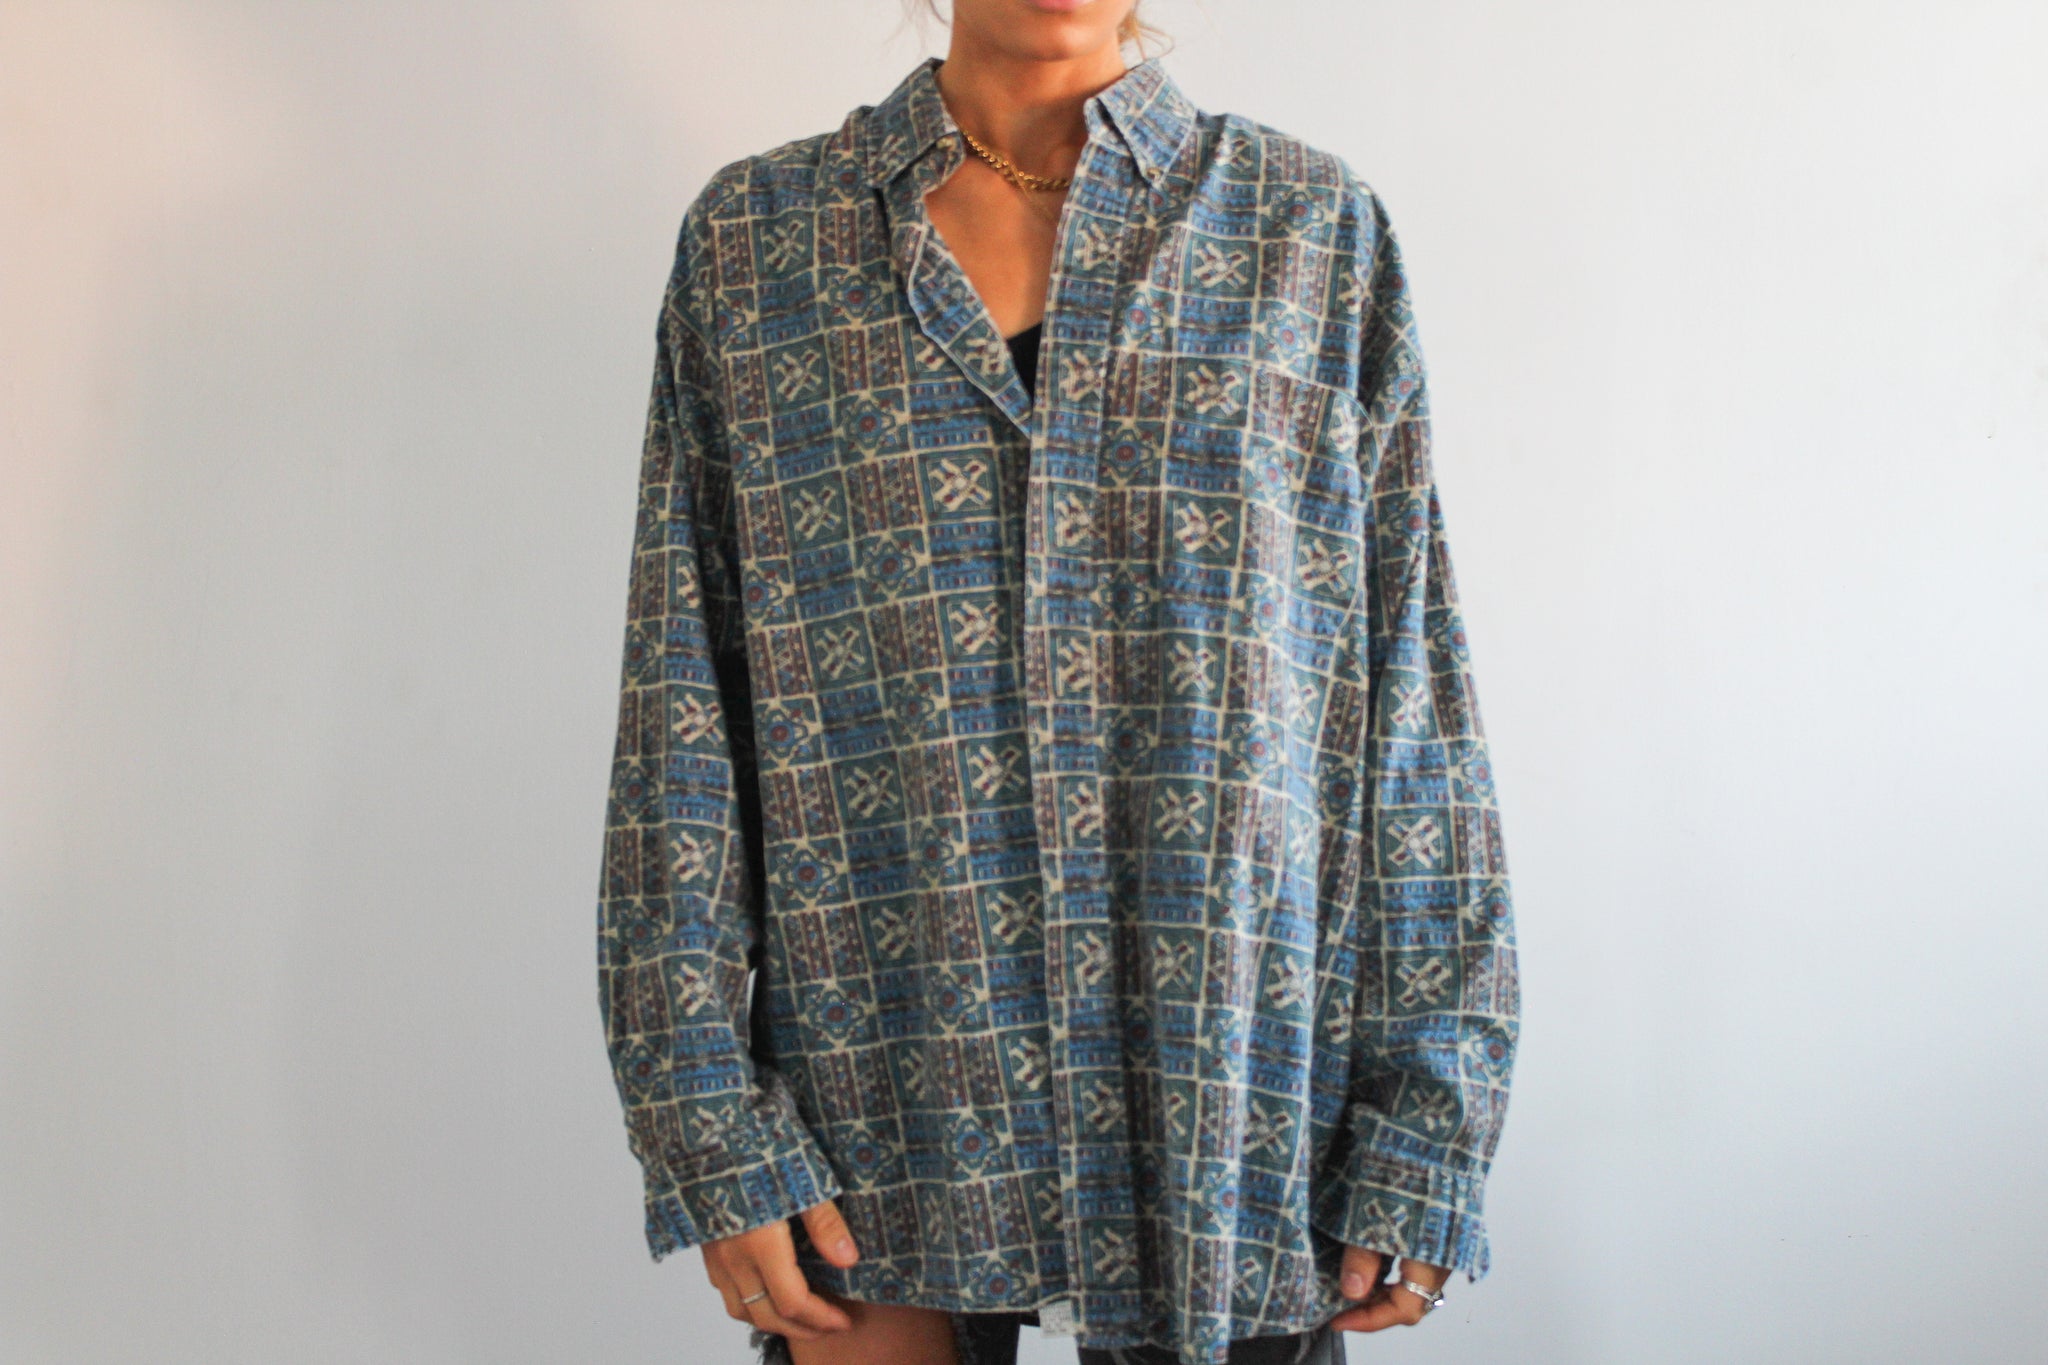 80s London Fog Button Up